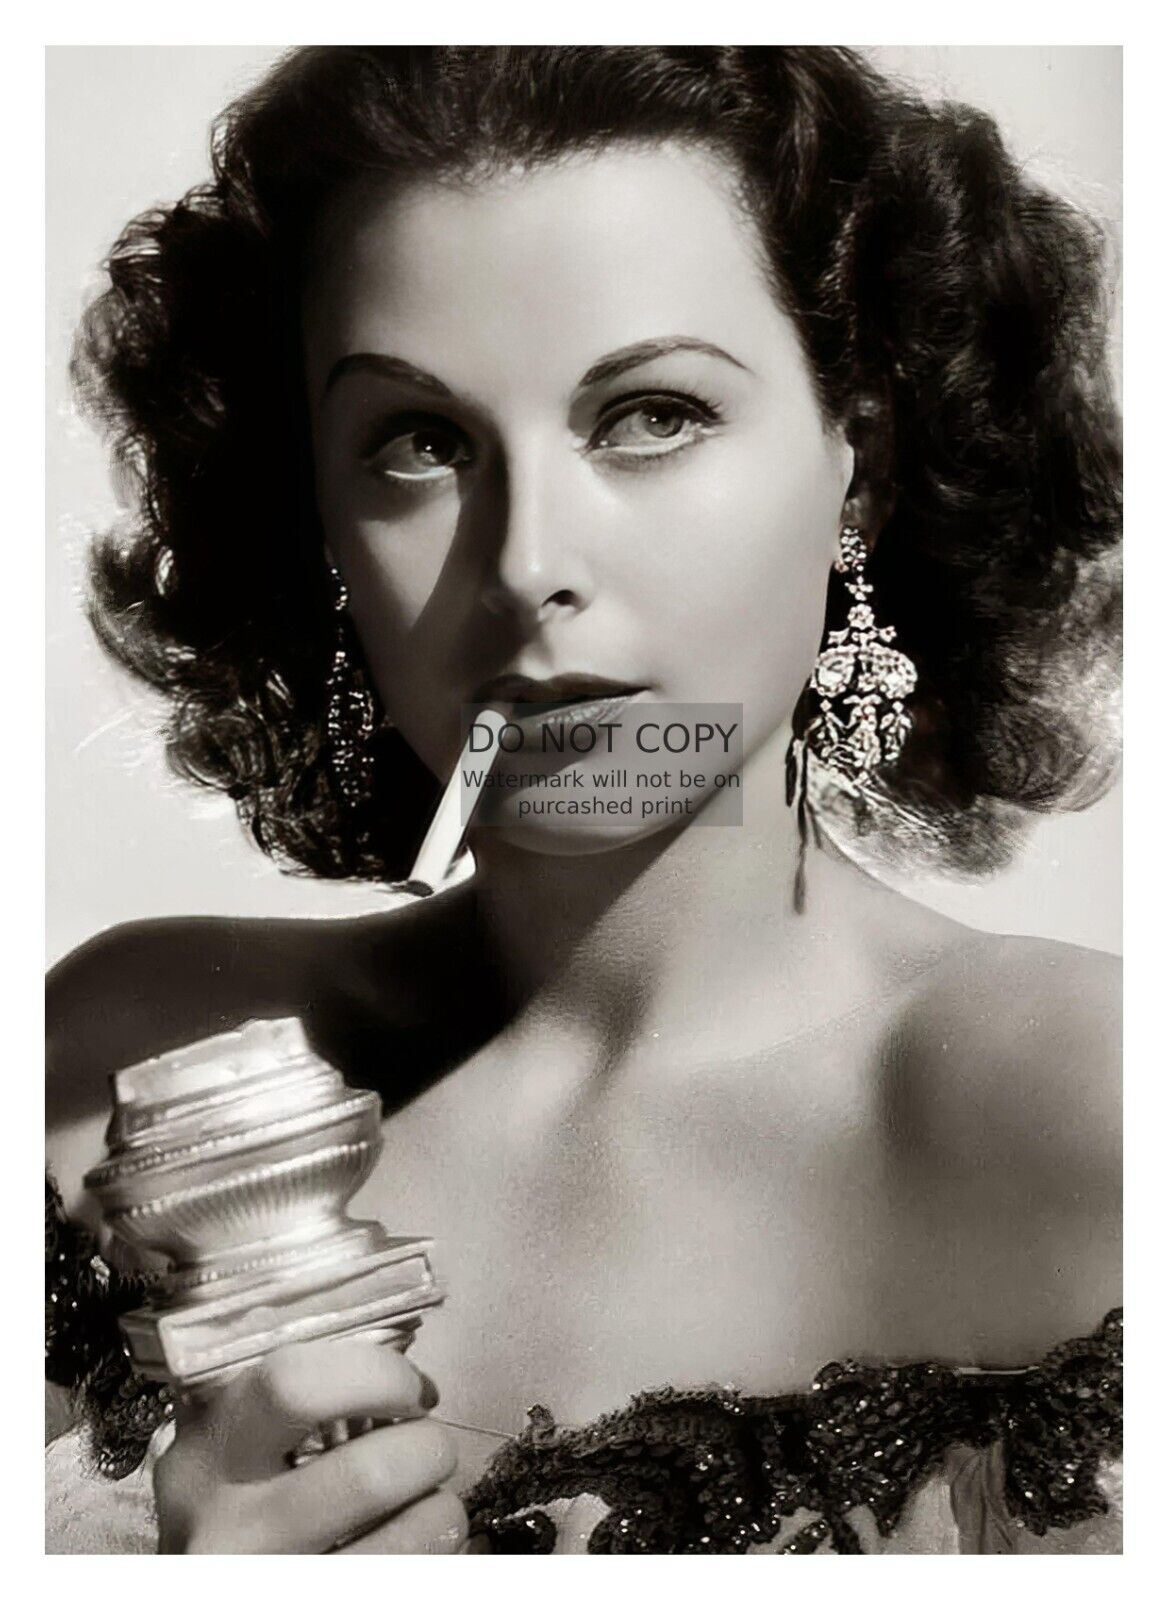 HEDY LAMARR IN DISHONERED LADY SEXY CELEBRITY ACTRESS 5X7 PUBLICITY PHOTO